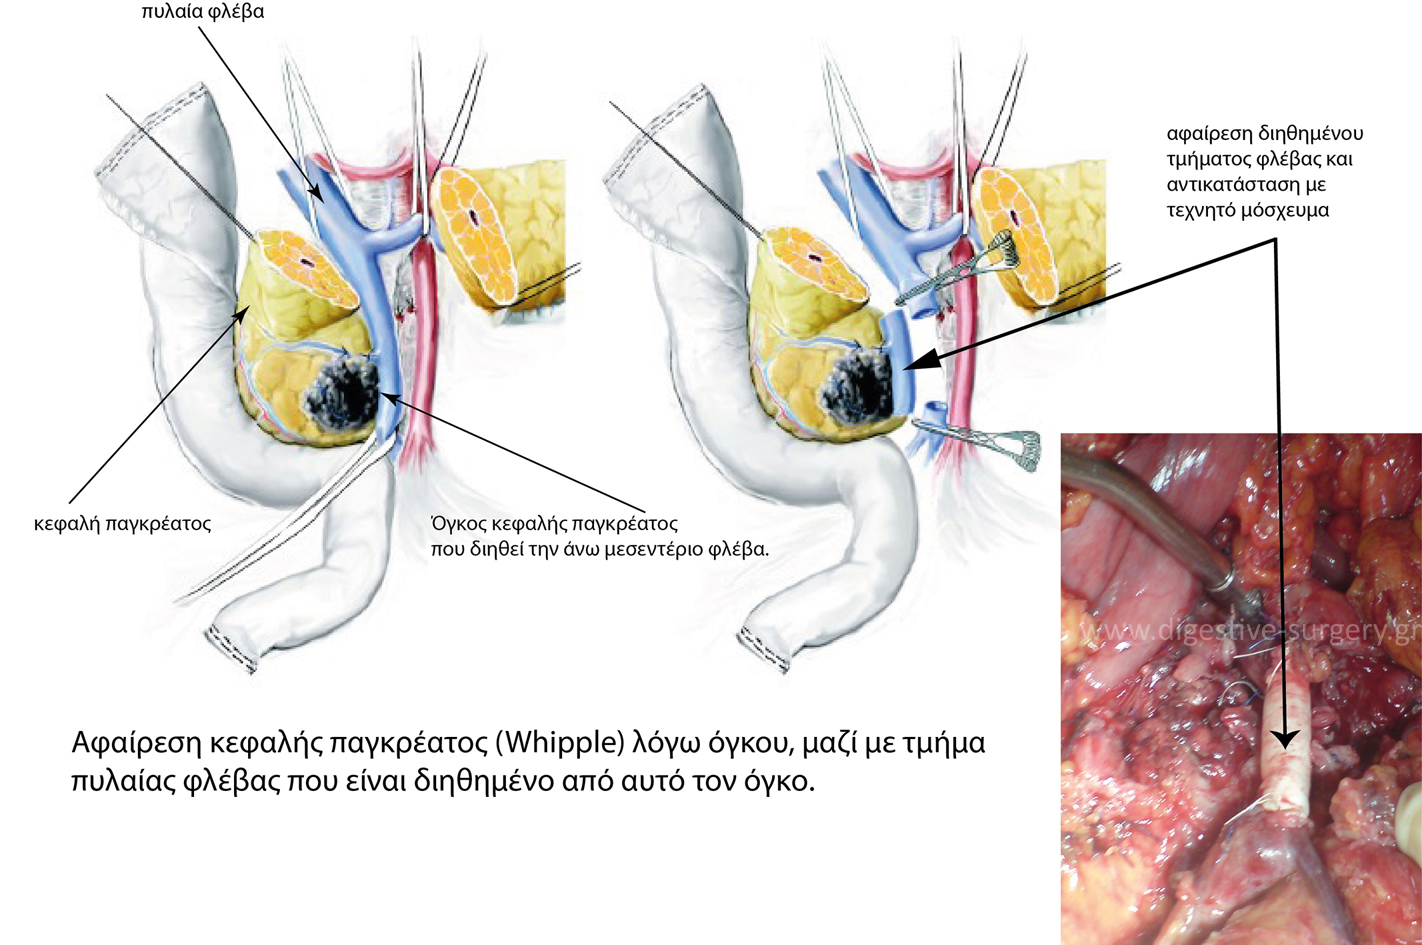 Resection and replacement of portal vein involved with cancer